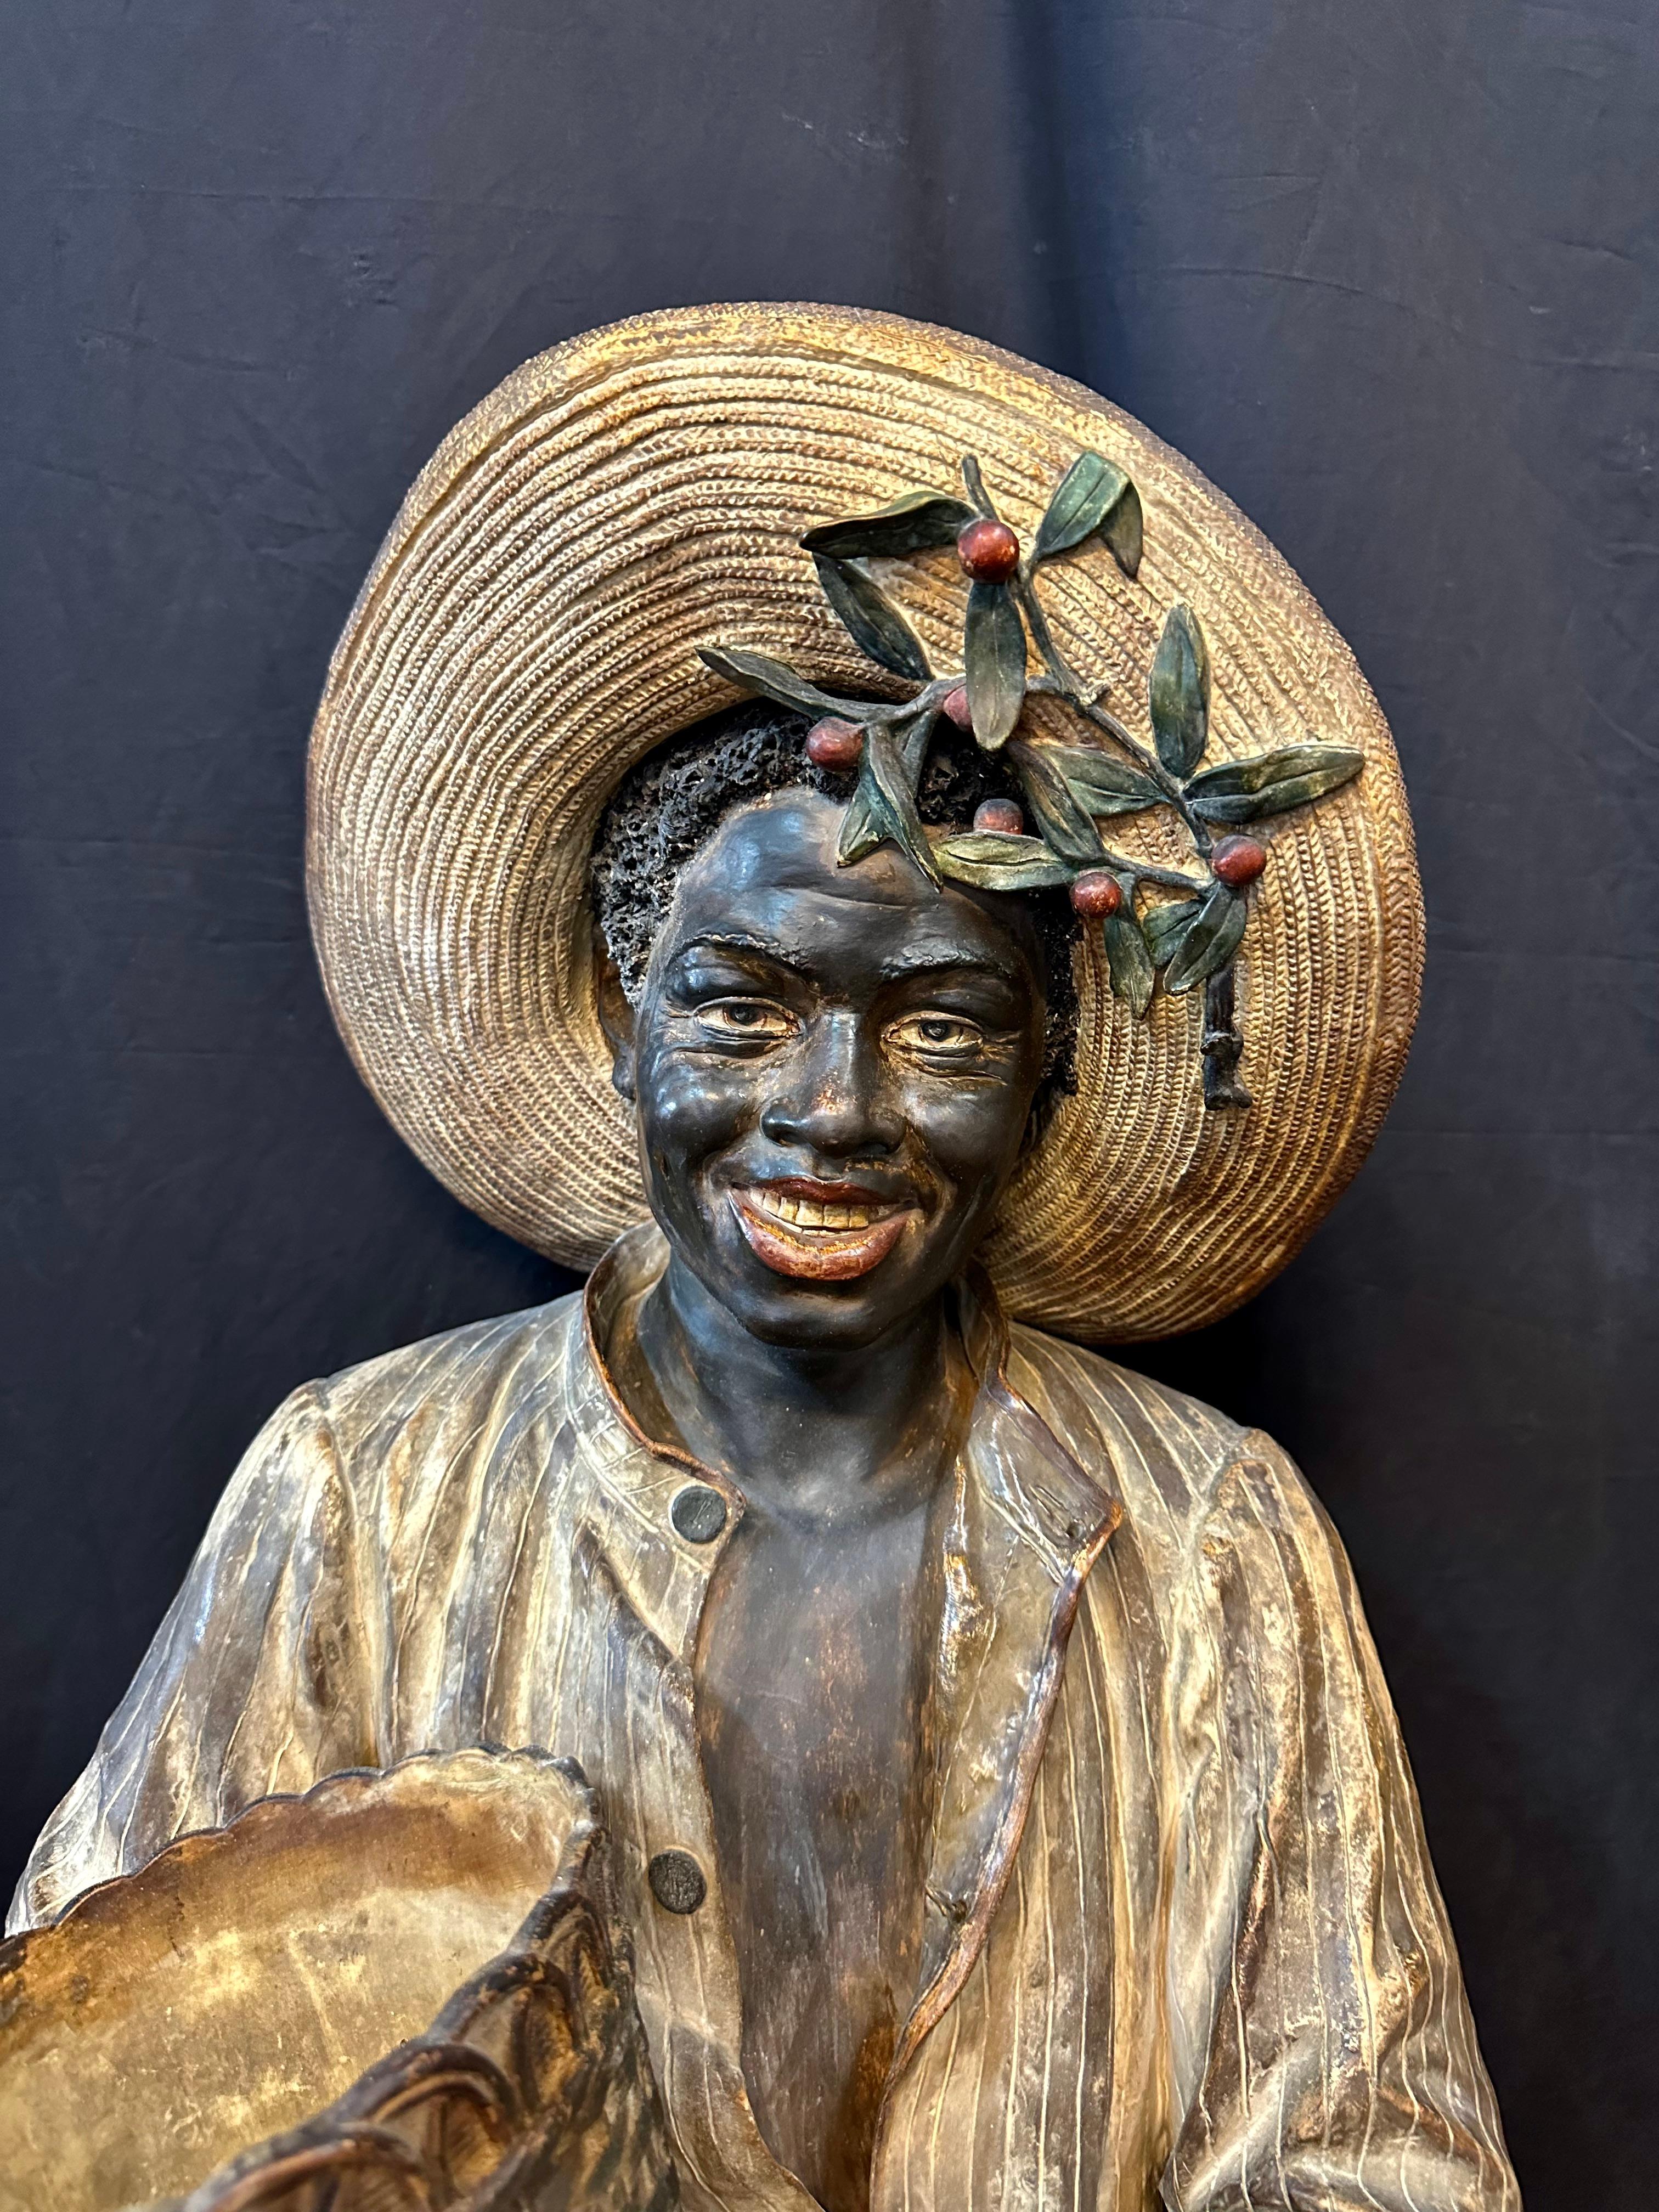 This rare vintage German made sculpted bust is beautifully hand painted & dates from the early 20th century. It is a high quality terra cotta portrayal of a young black boy/man, impressively detailed with life-like facial features & strong muscular